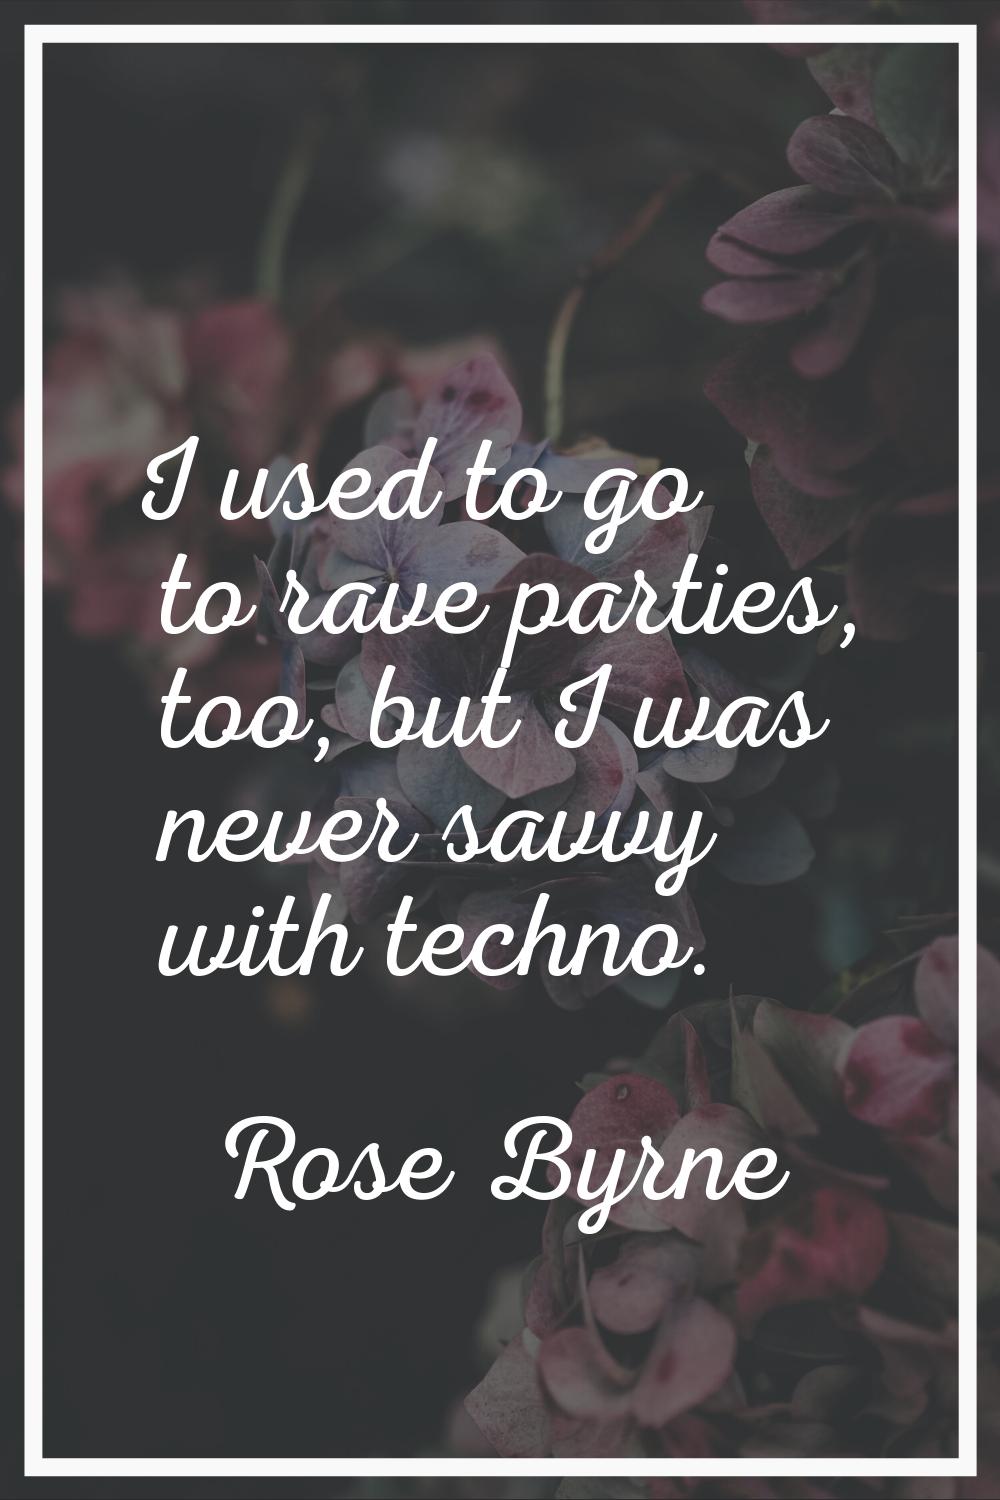 I used to go to rave parties, too, but I was never savvy with techno.